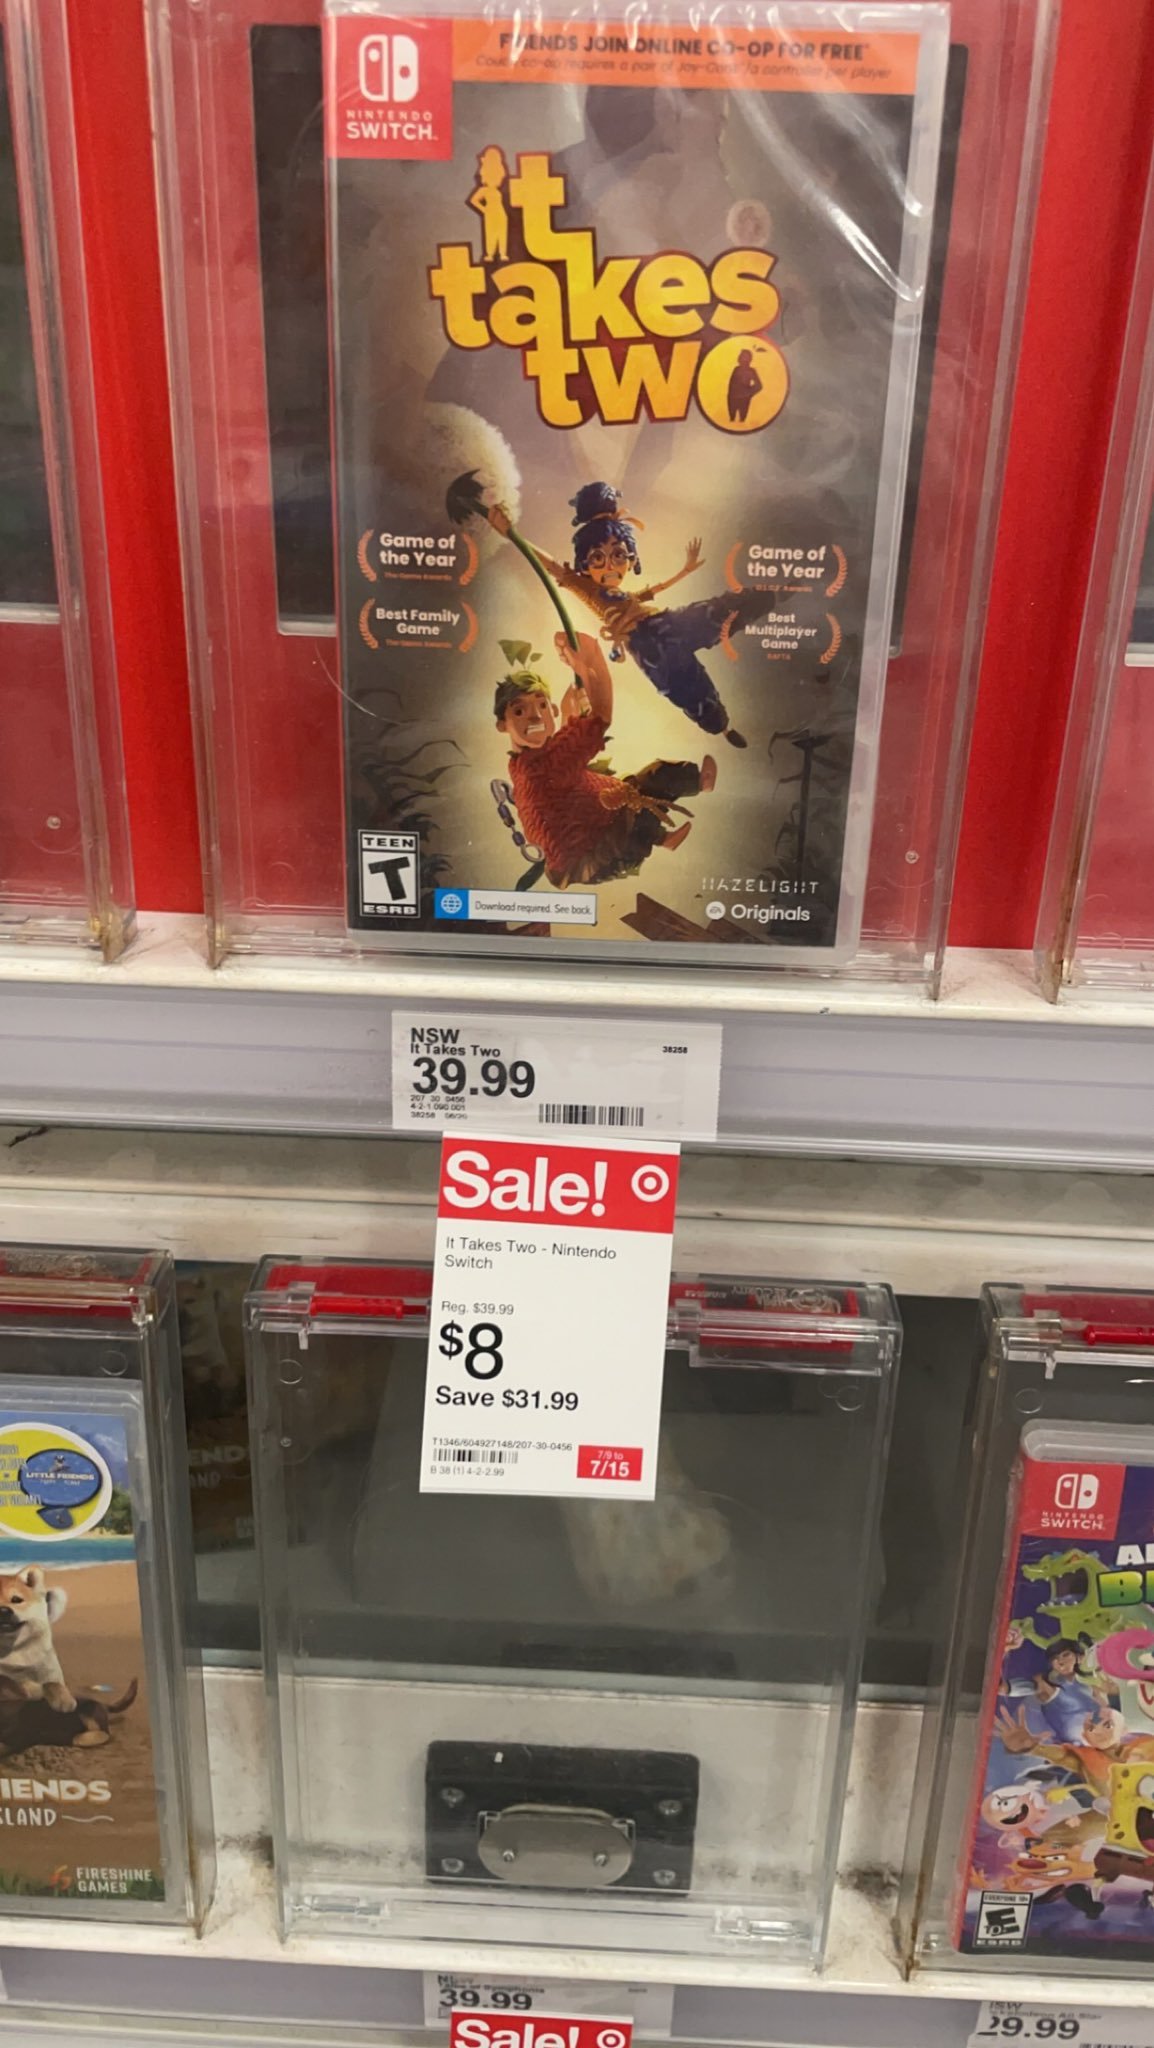 Wario64 on X: (YMMV) It Takes Two (Switch) may be $8 at Target in